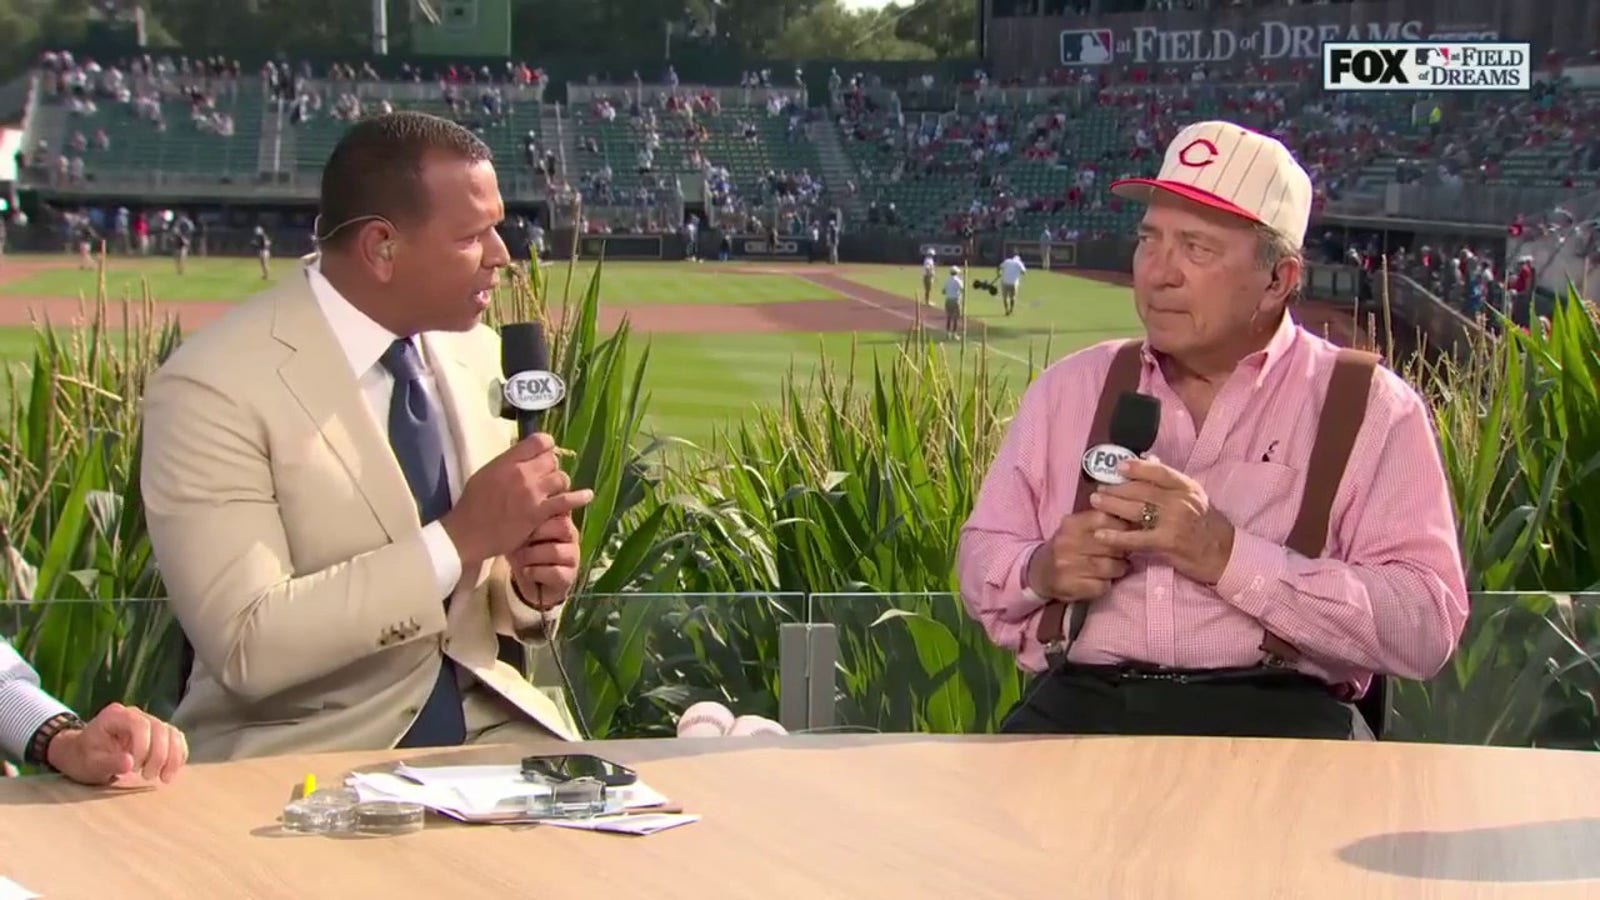 Johnny Bench on the beauty of Field of Dreams and his love for the game